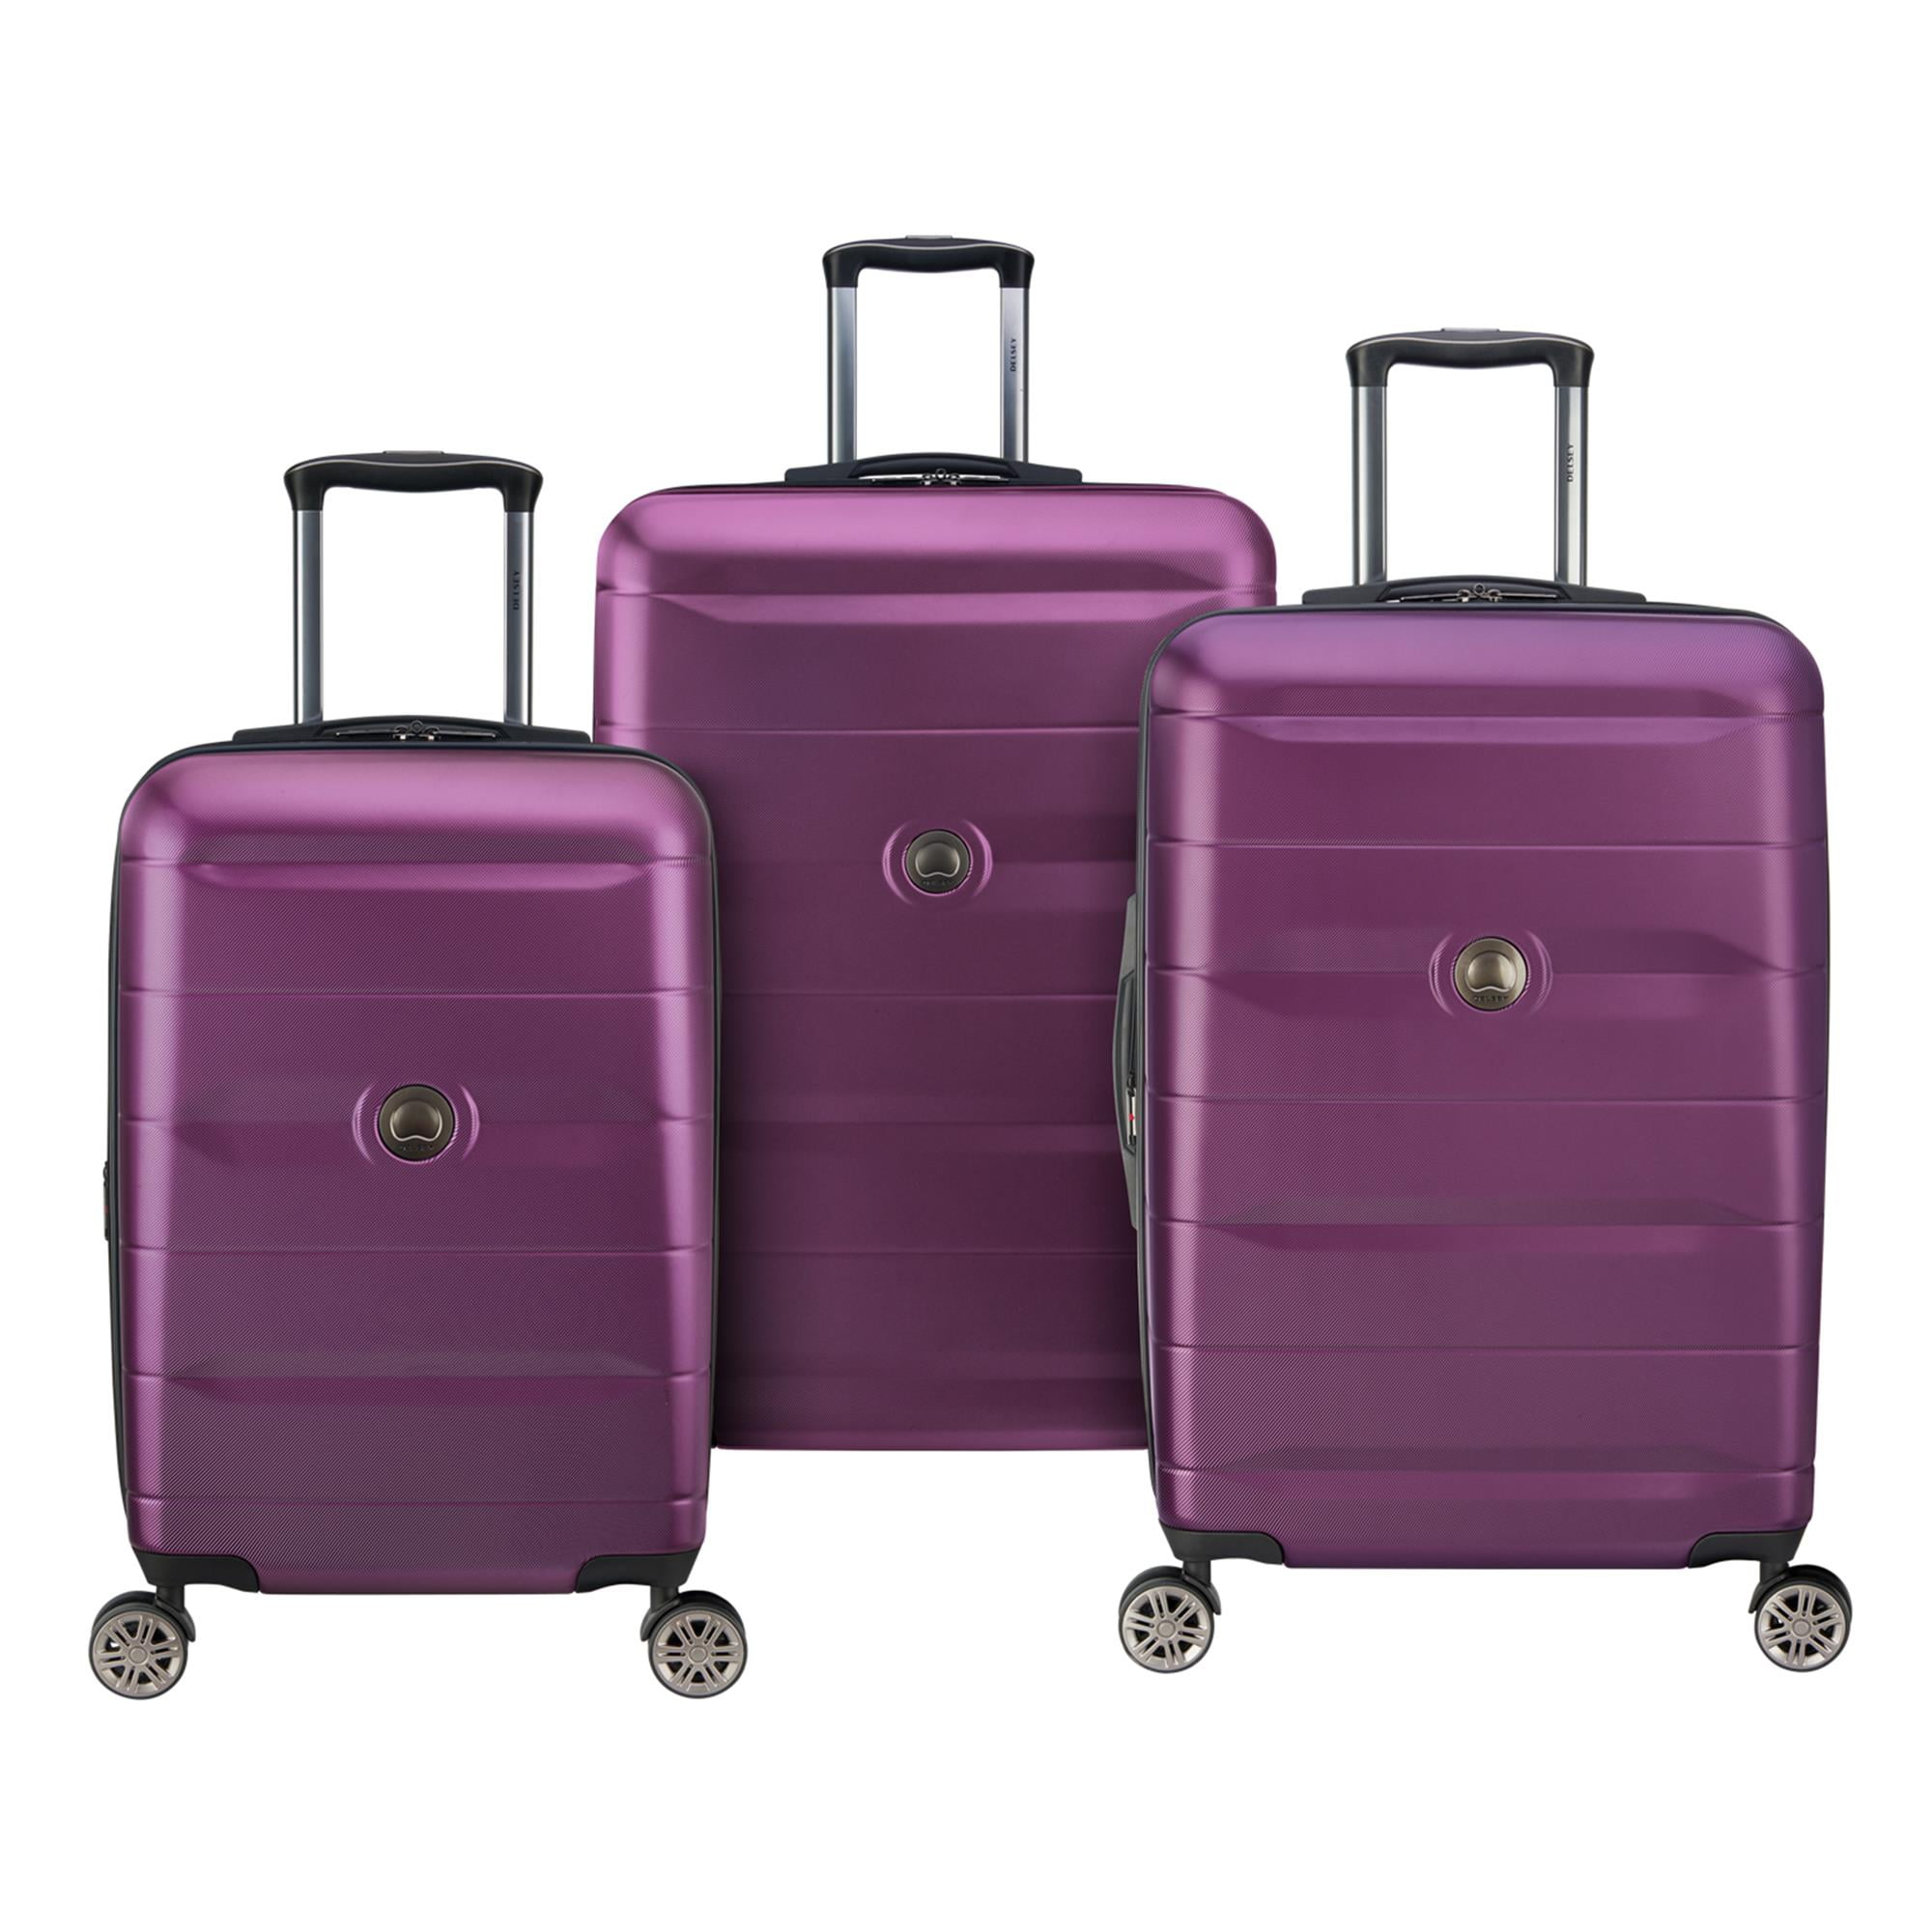 Purple DELSEY Paris Comete 2.0 Hardside Expandable Luggage with Spinner Wheels Checked-Medium 24 Inch